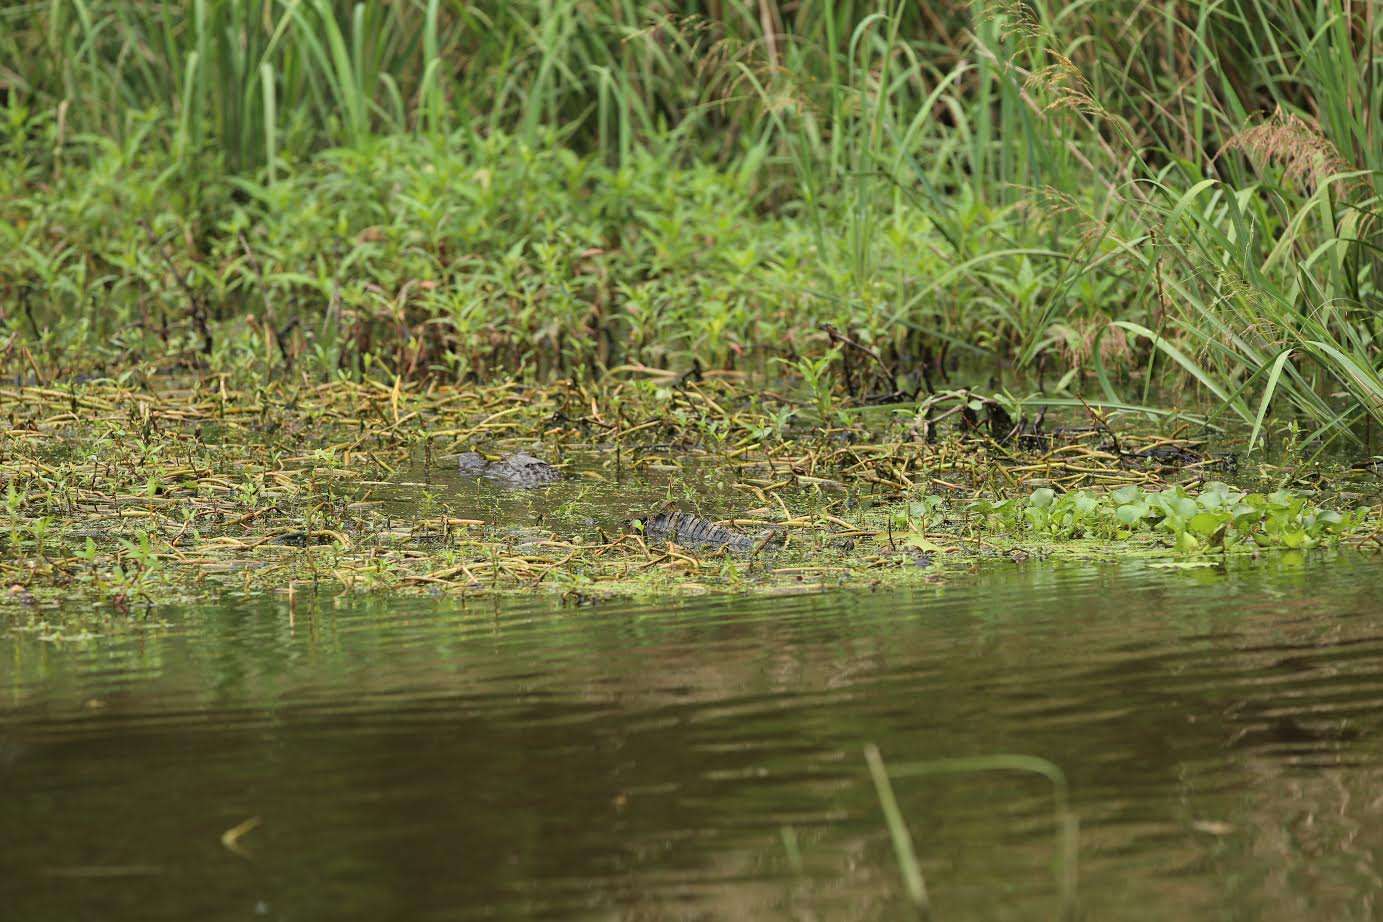 The last time the Mississippi Department of Wildlife Fisheries and Parks counted alligators, they found more than 8,000 in Hinds, Madison and Rankin counties alone.